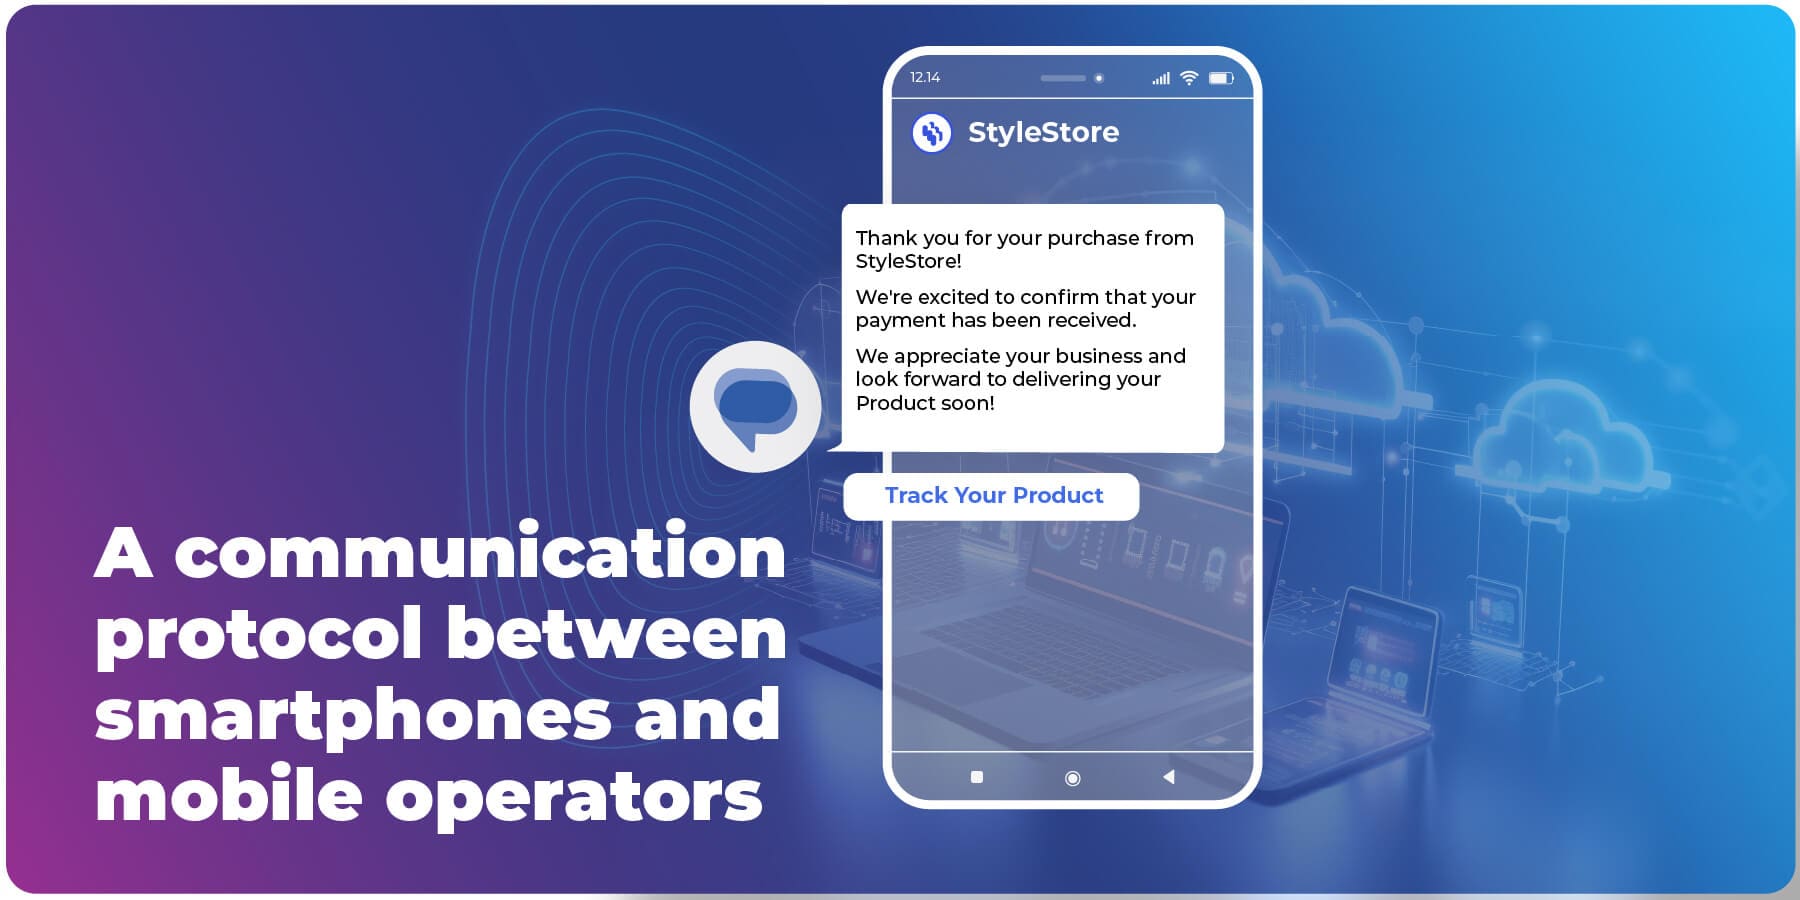 RCS is a communication protocol between smartphones and mobile operators